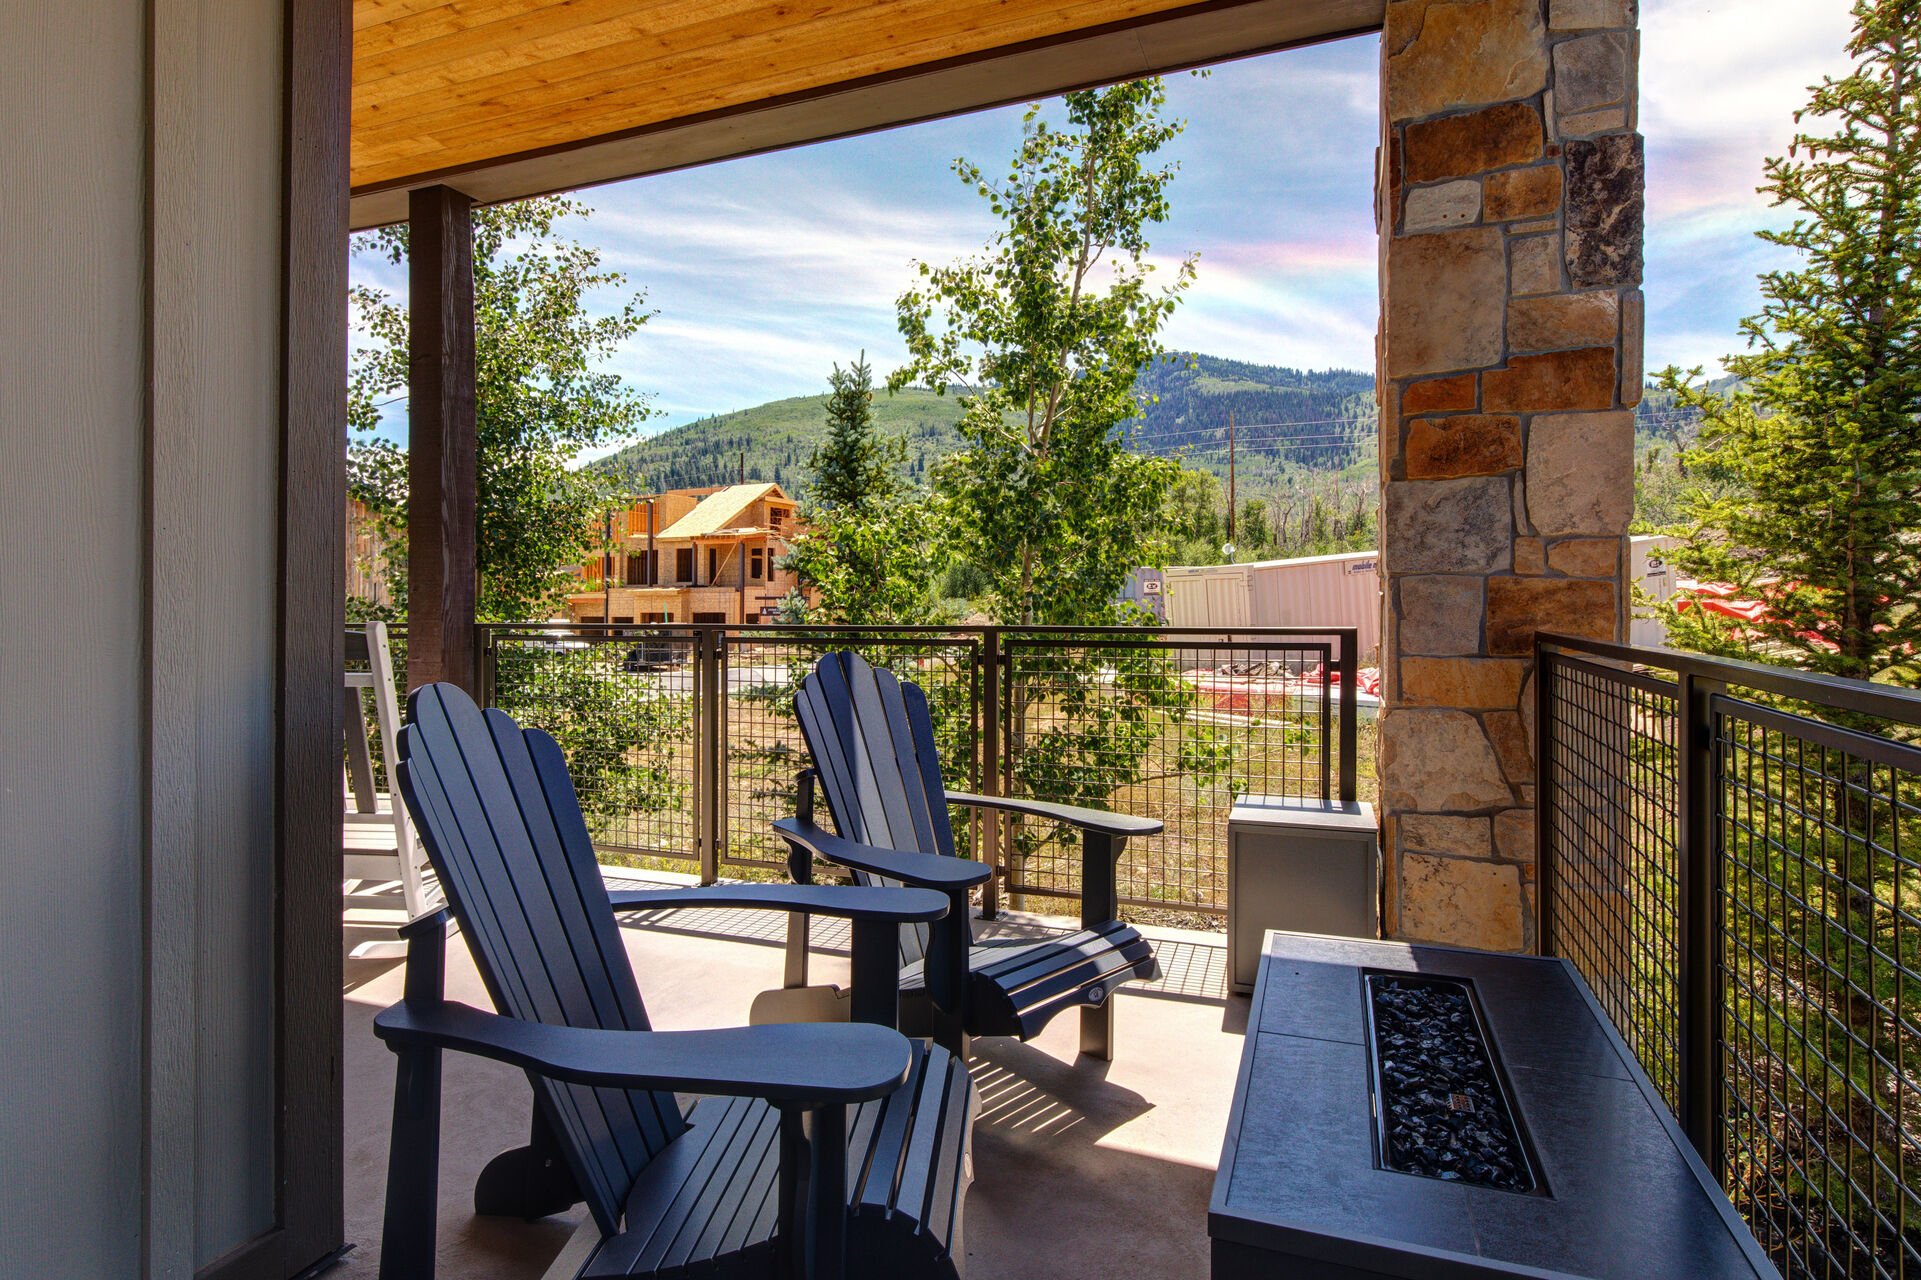 Private, wrap-around deck with rocking chairs, outdoor furnishings, BBQ grill, fire pit and breathtaking views of Canyons Gold Course & Resort